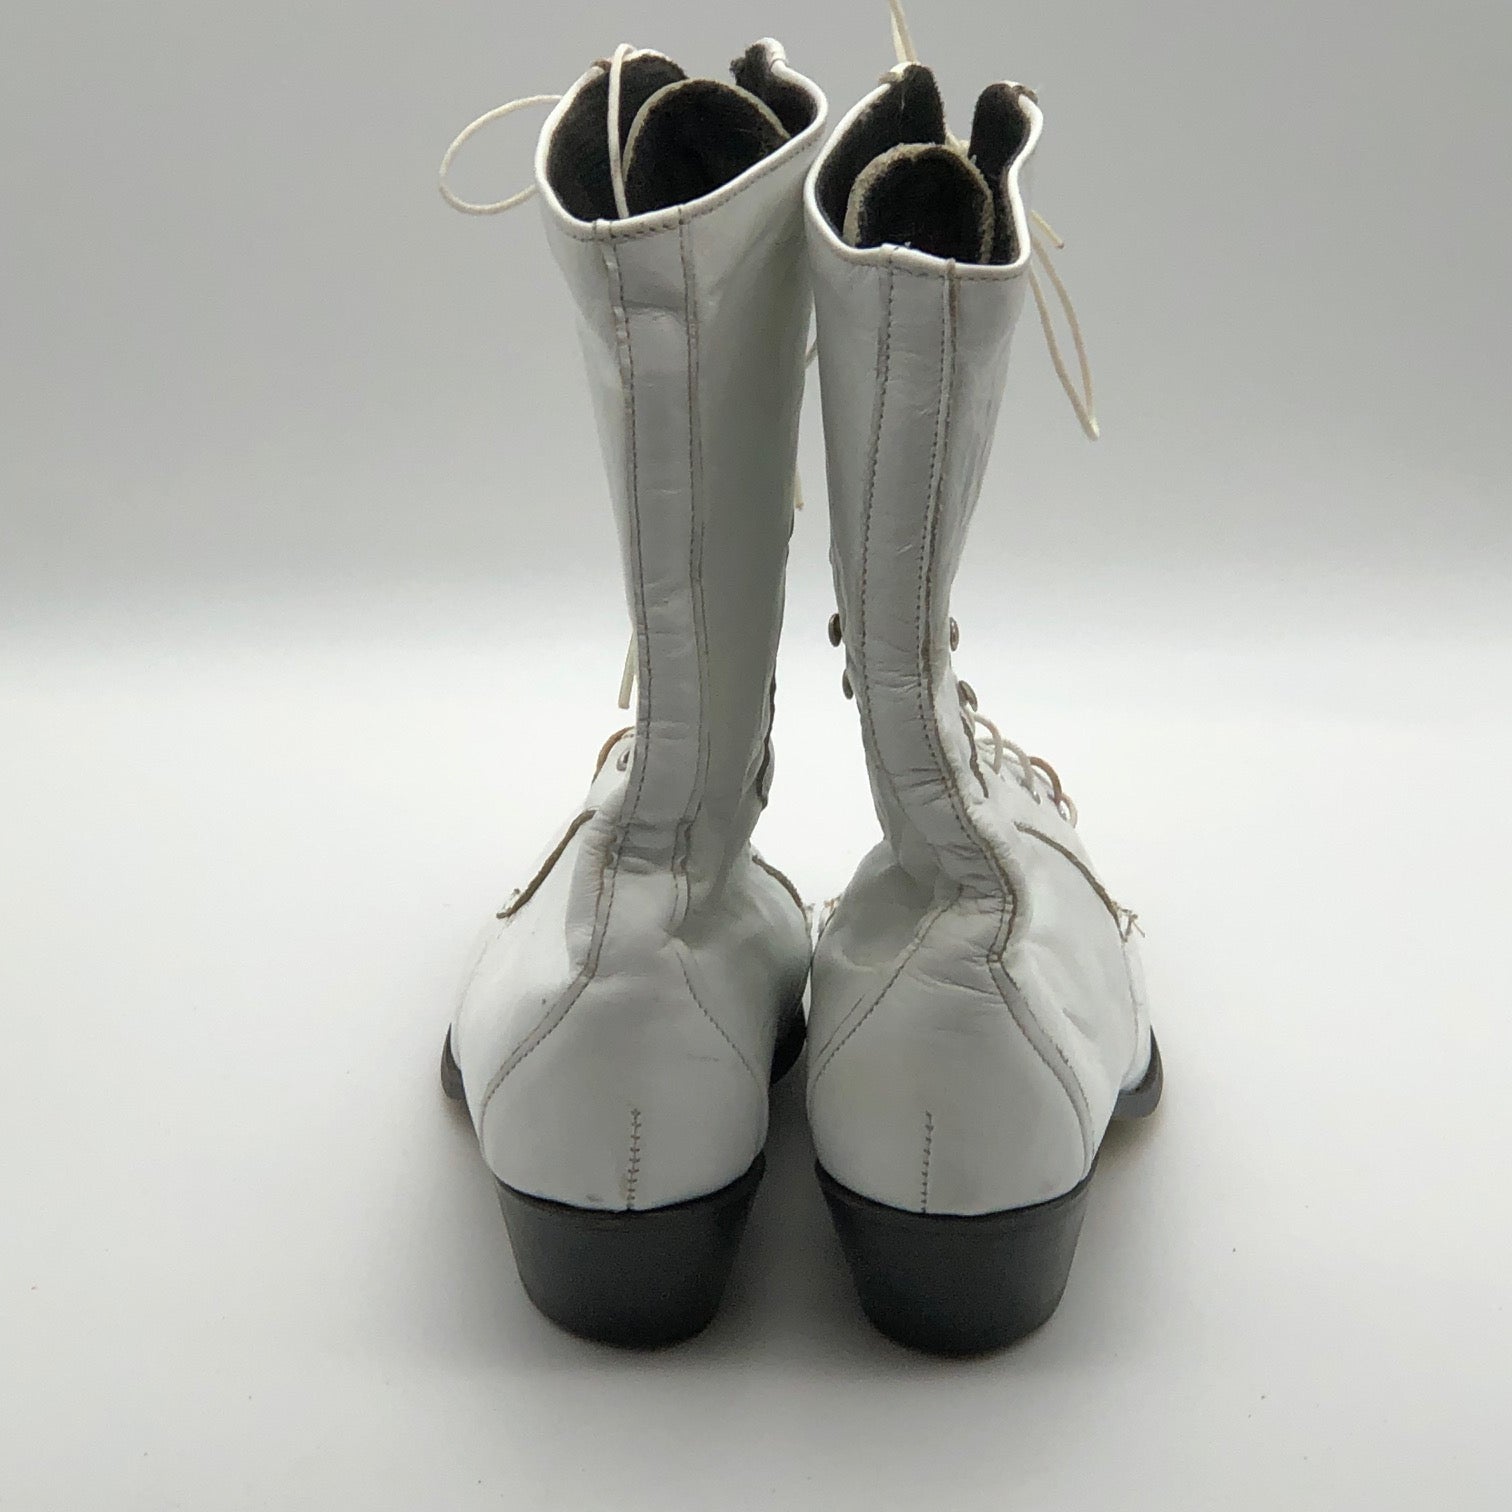 White Western Victorian Boots